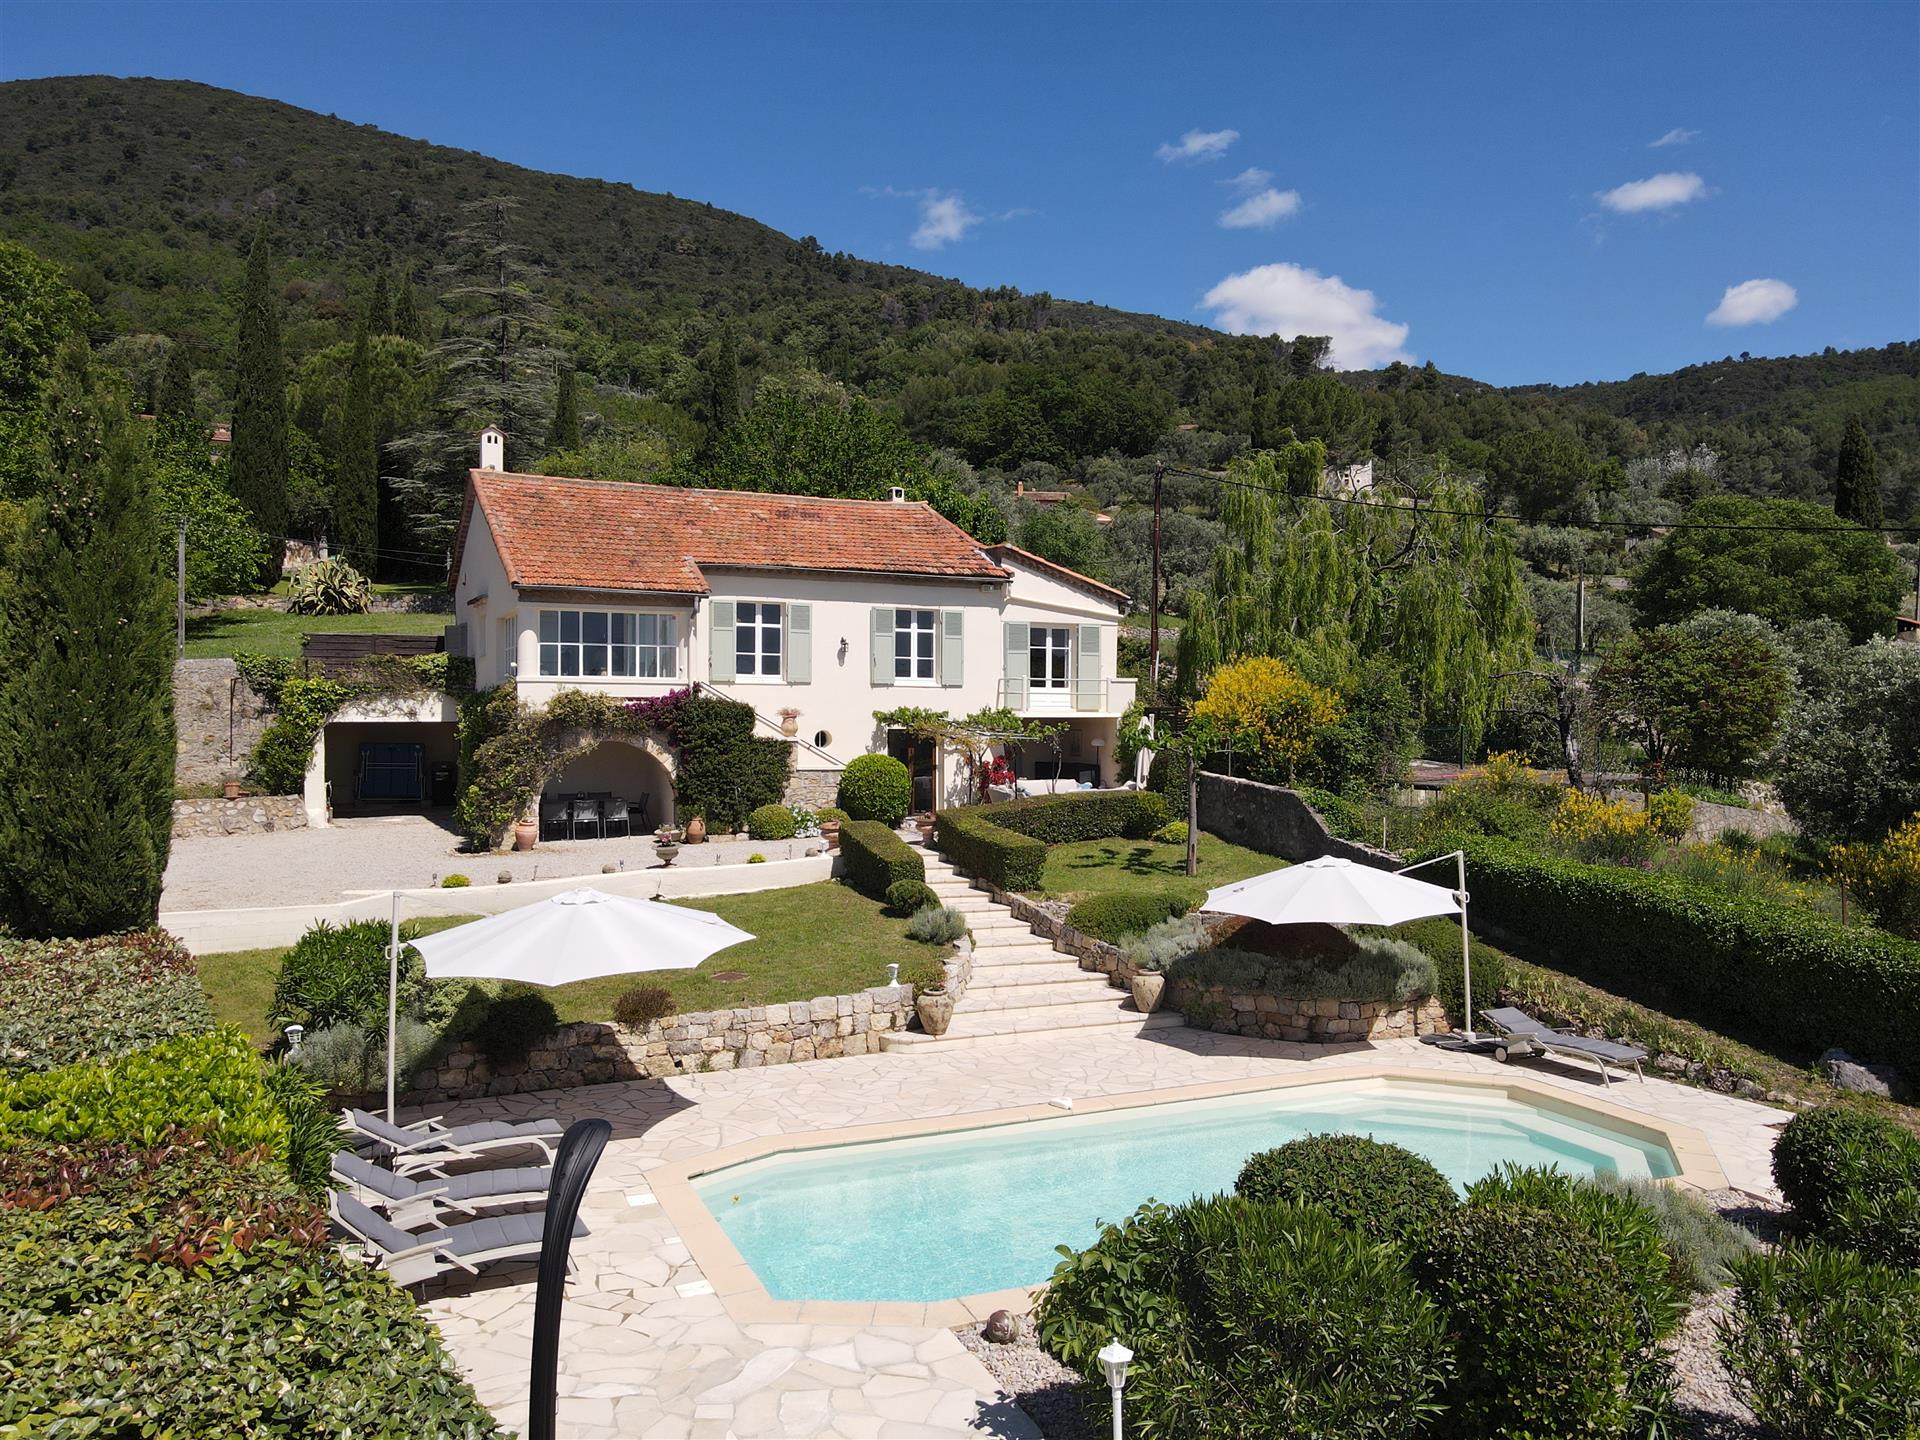 A stunning 4 bedroom villa with pool and panoramic views, within walking distance of Seillans.